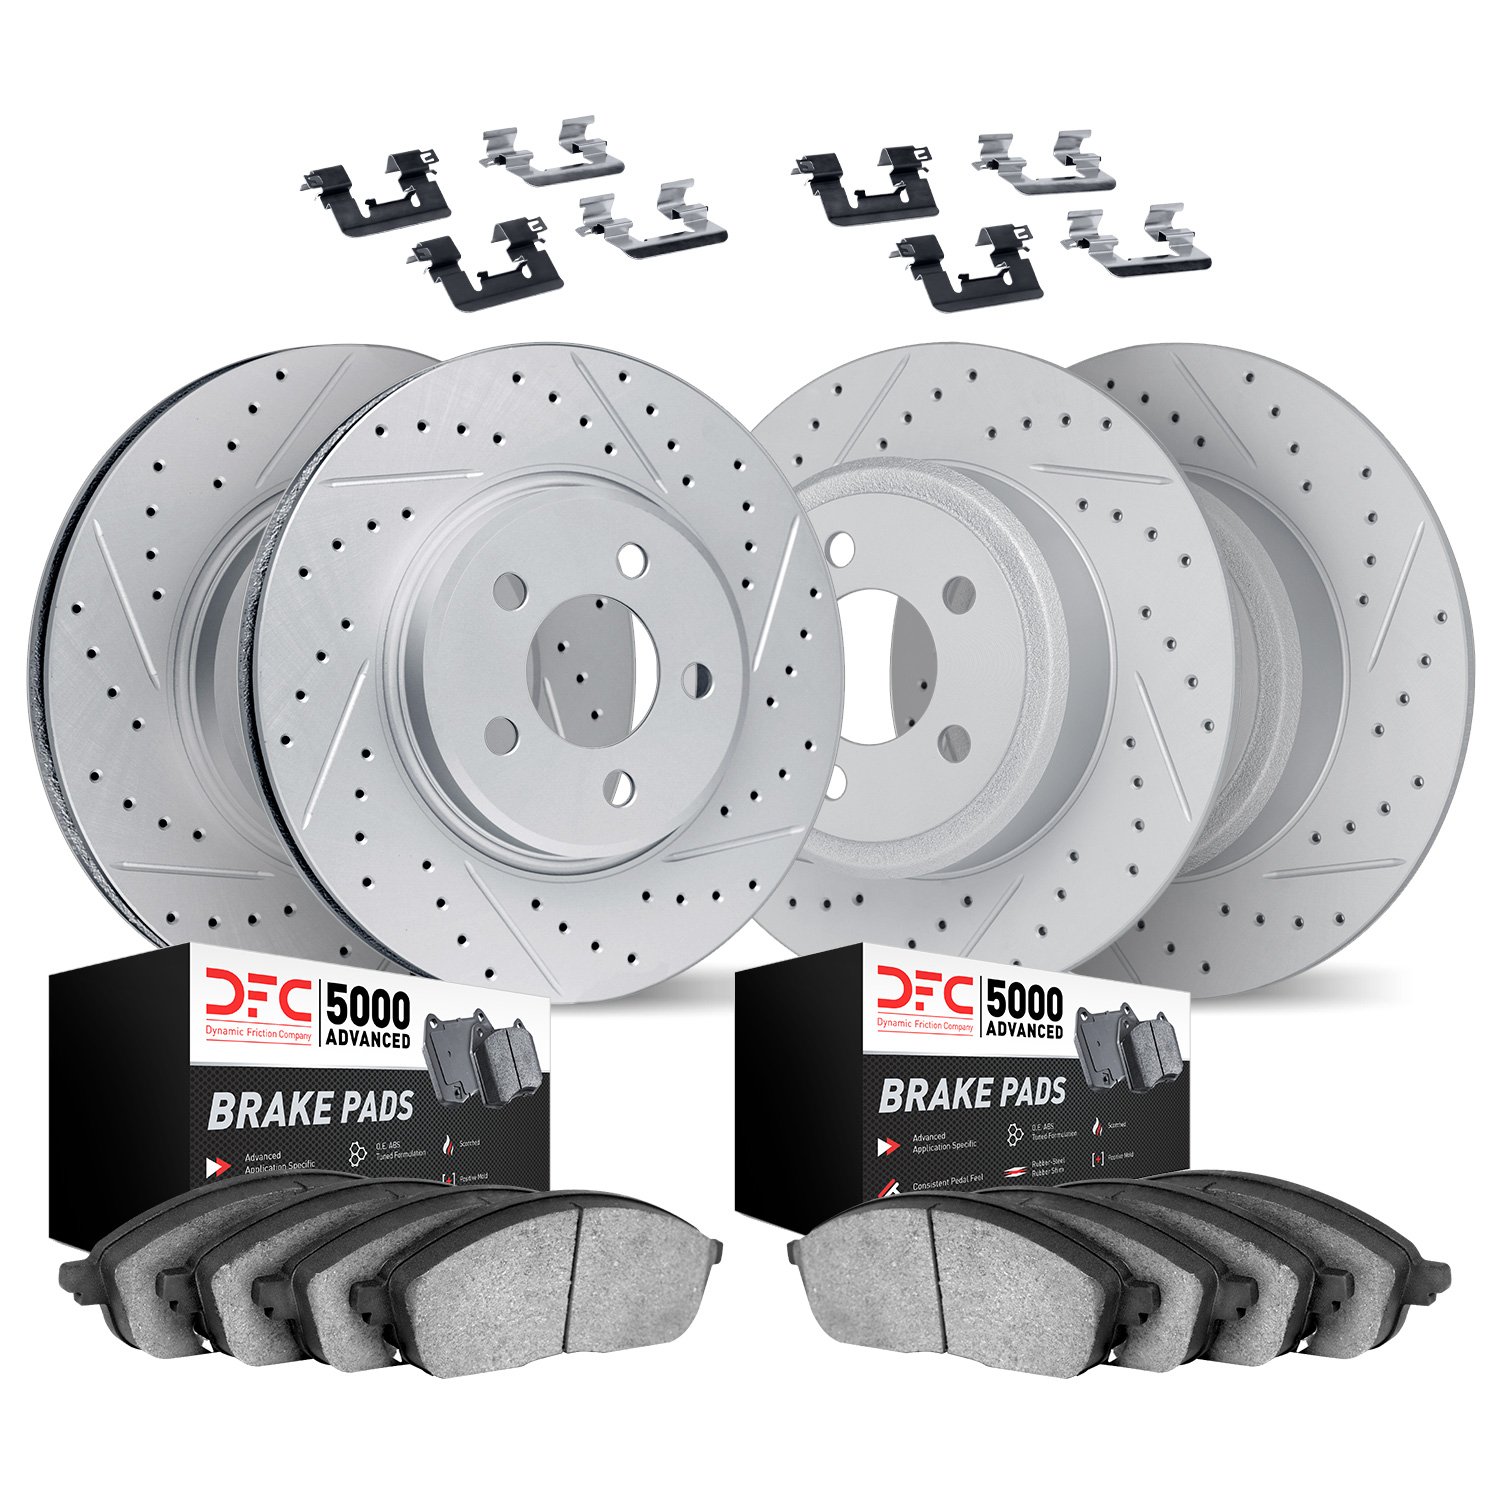 2514-27015 Geoperformance Drilled/Slotted Rotors w/5000 Advanced Brake Pads Kit & Hardware, 2018-2020 Volvo, Position: Front and